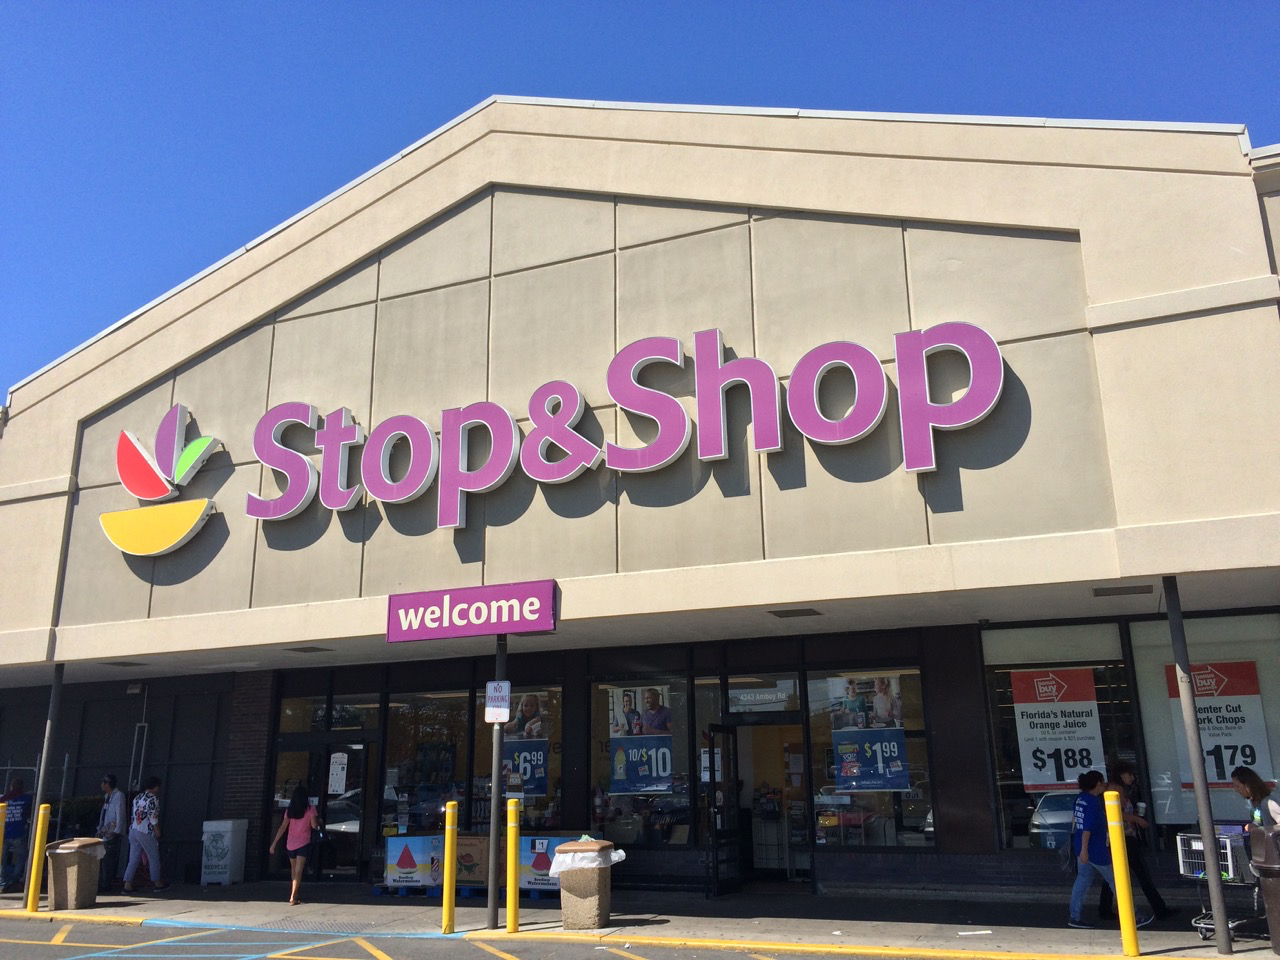 Stop and Shop: